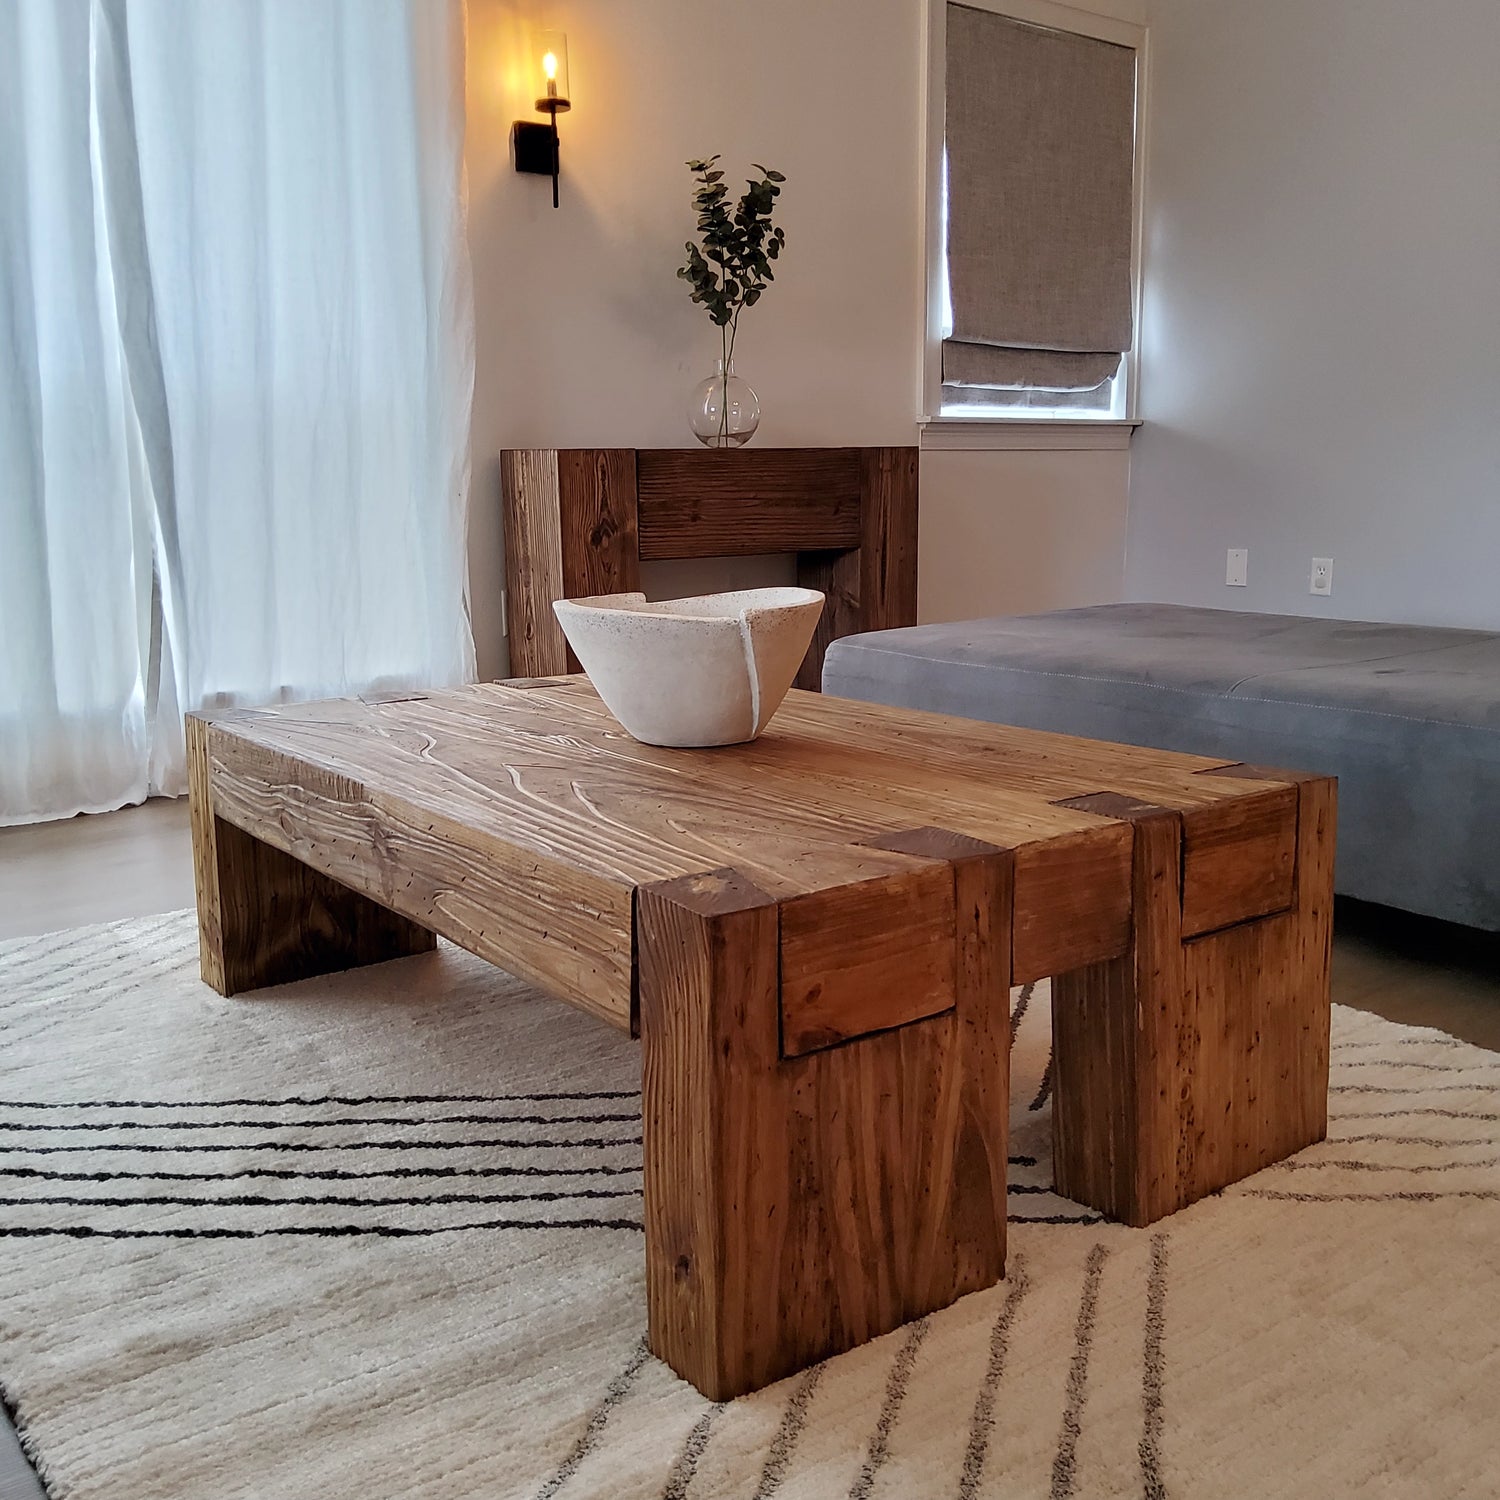 Side Tables & End Tables